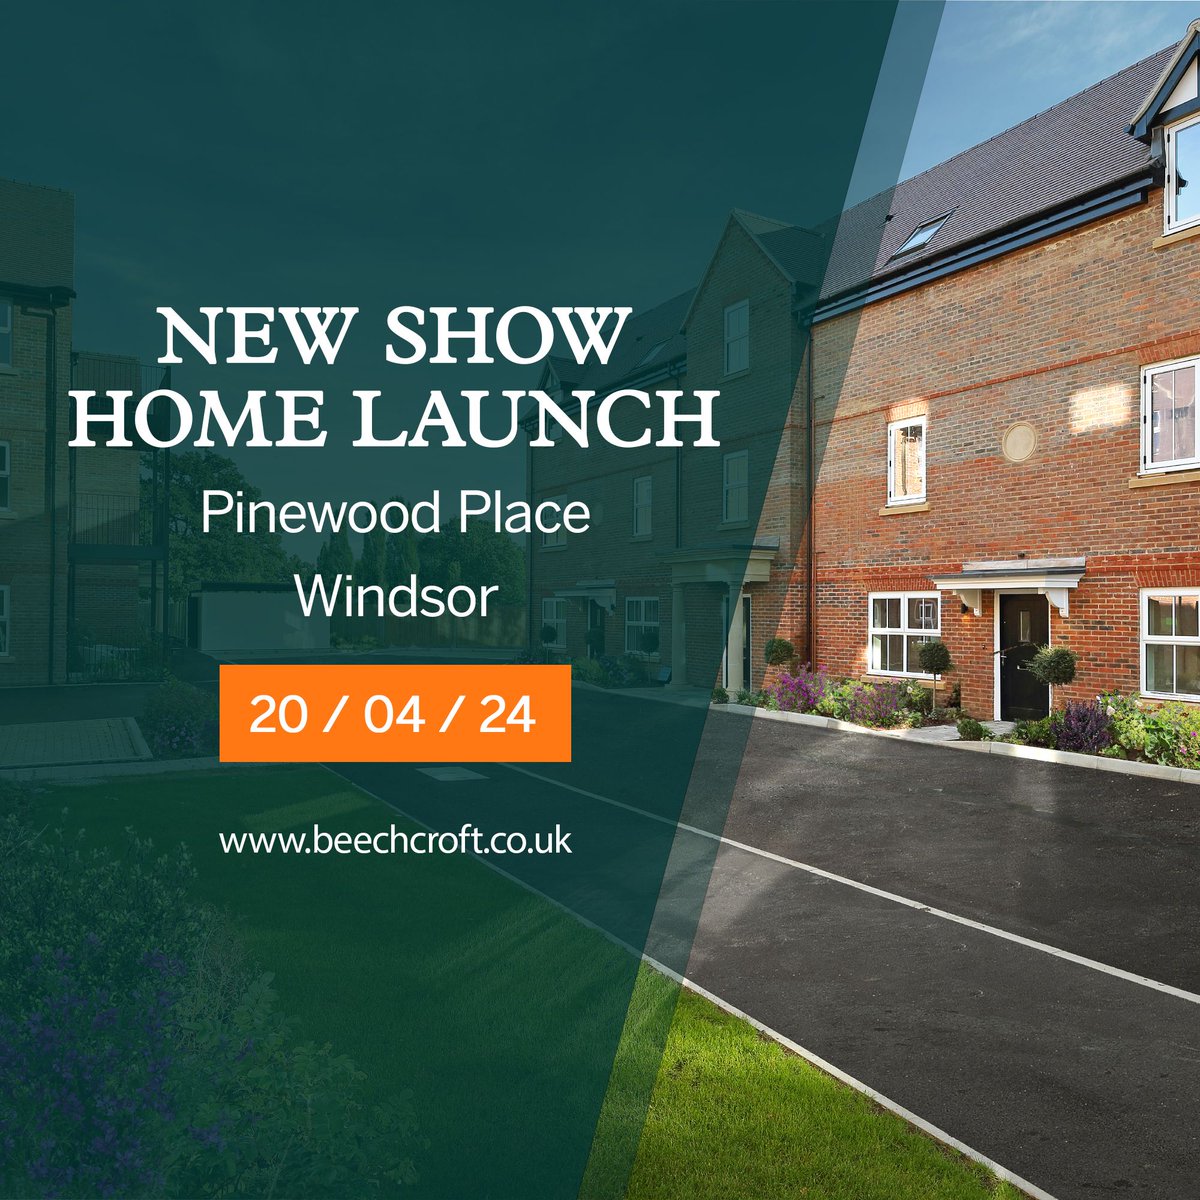 Our new show home at Pinewood Place, #Windsor is opening this Saturday!

Come along and view the new #showhome which is a first-floor apartment with two bedrooms, a study, a balcony and lift access, priced at £650,000. 

RSVP by:
☎️ 01753 963953
💻 buff.ly/3U6XzwS